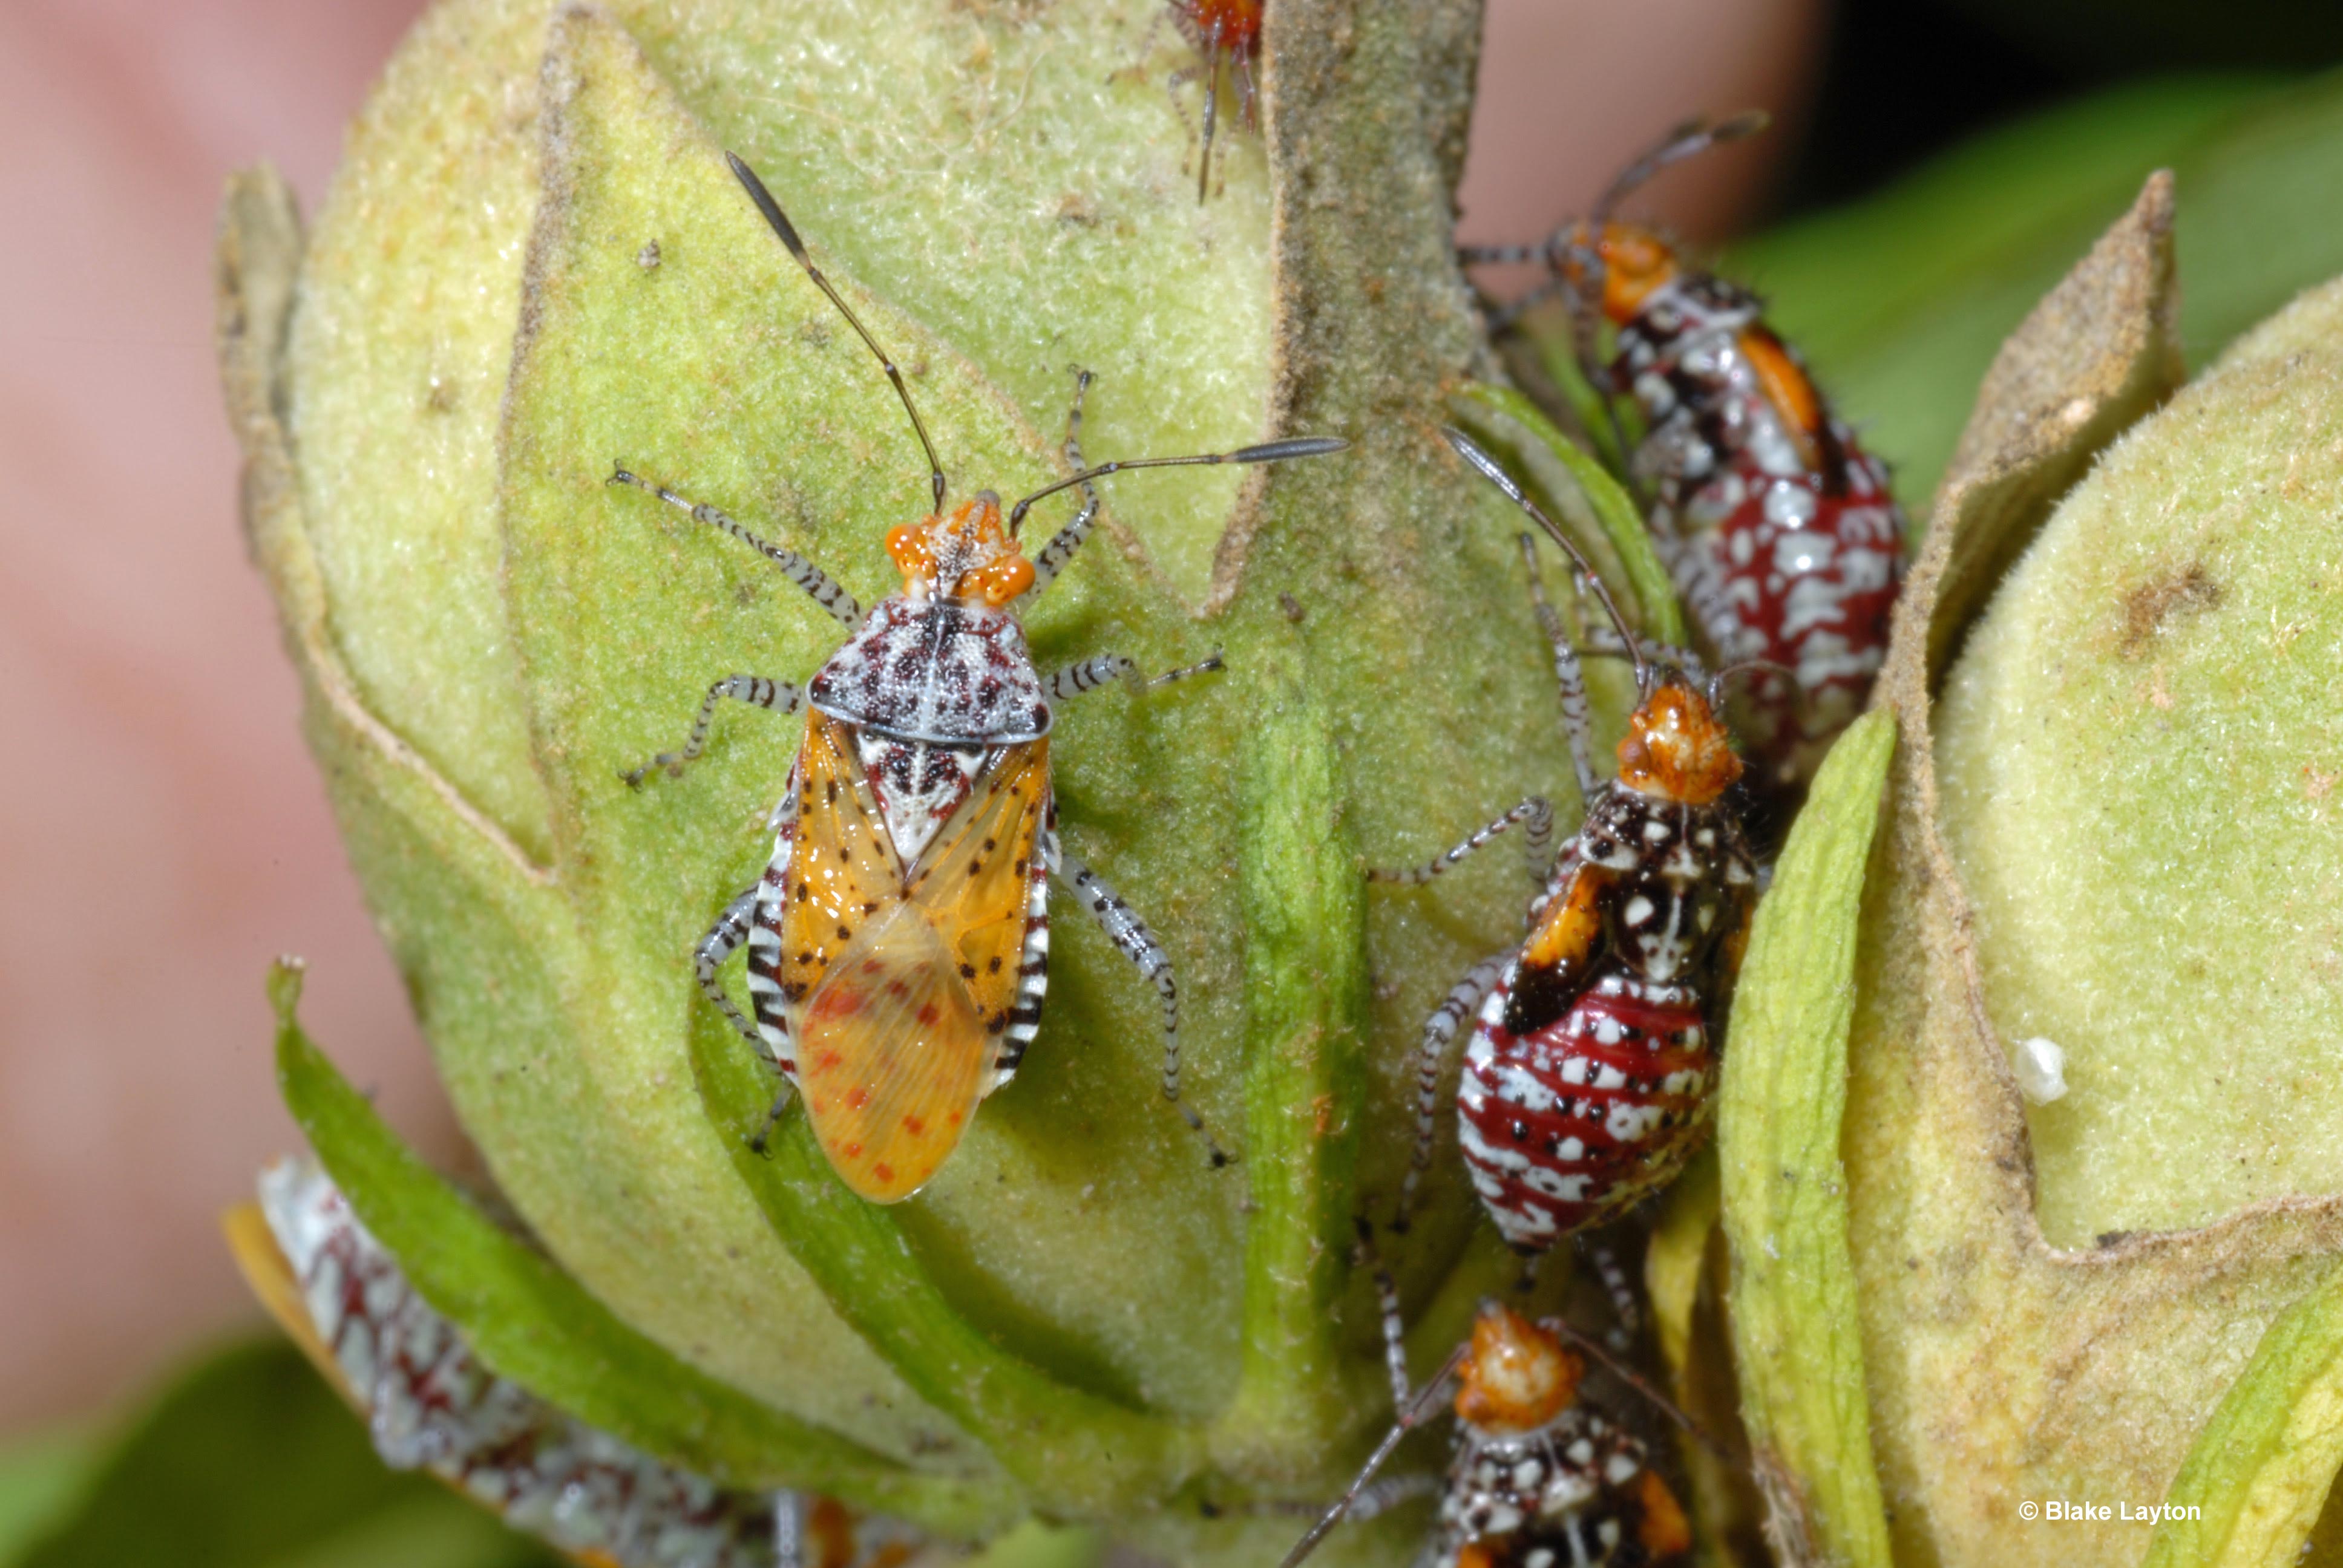 Bright orange and white bugs rest on a green leaf.